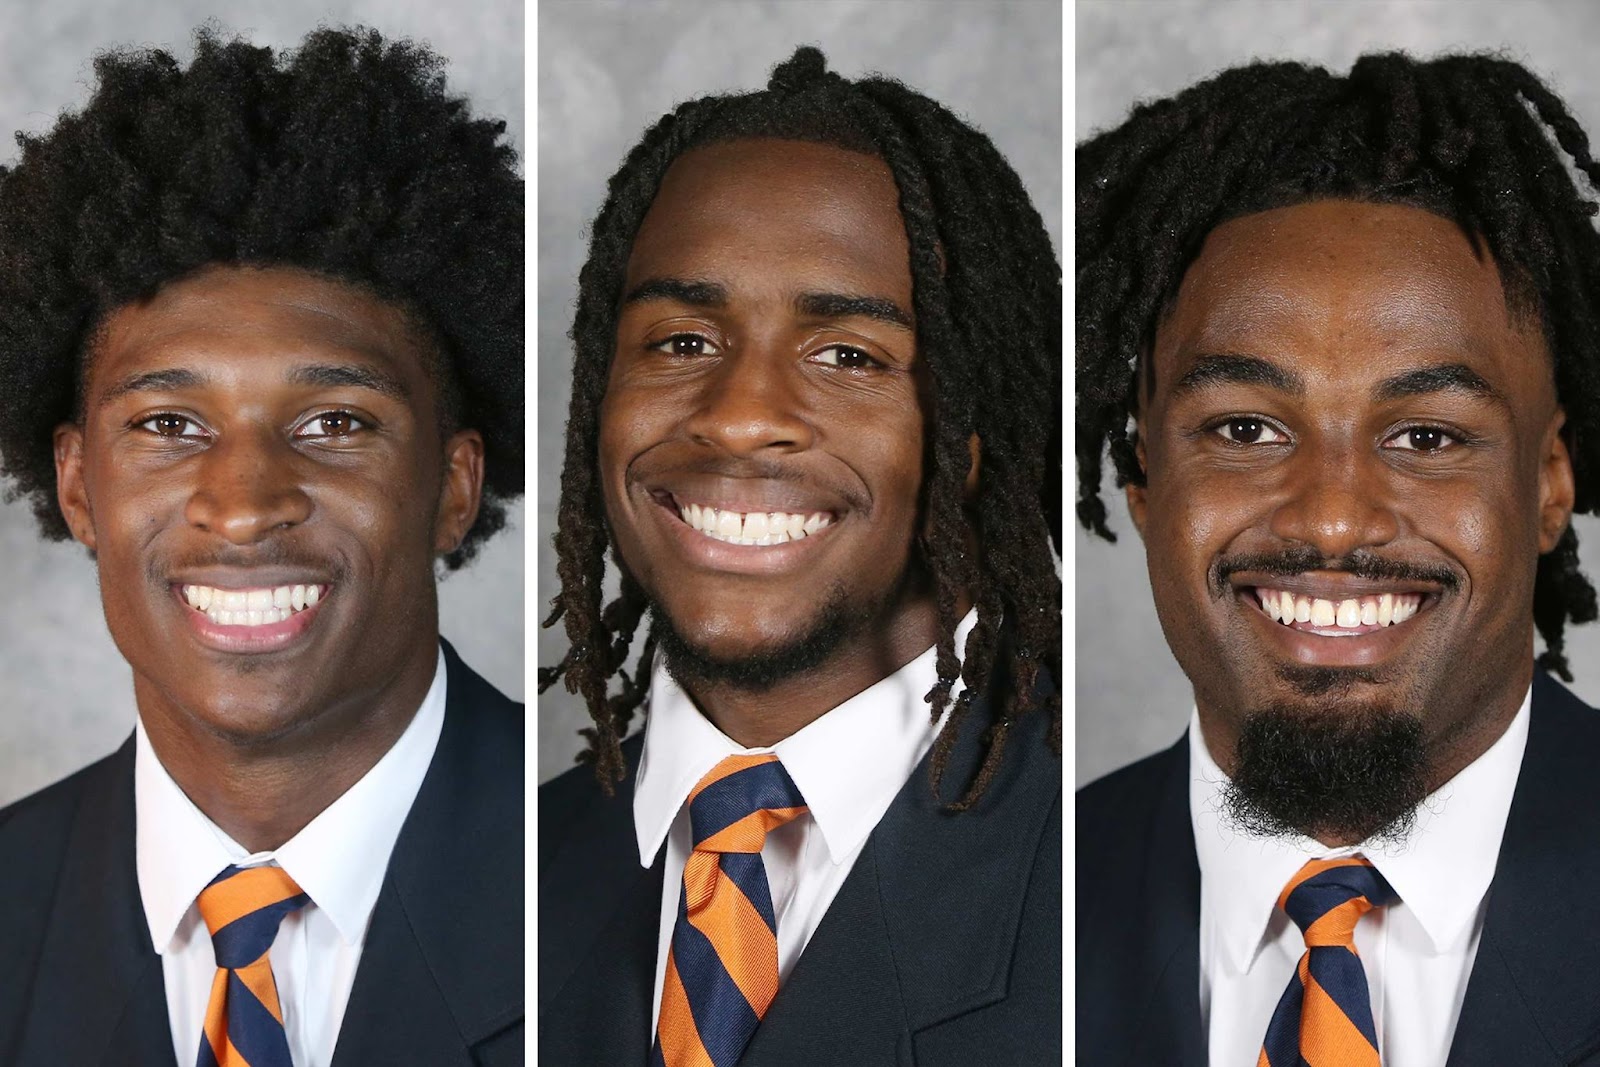 Picture shows three individual headshots of three smiling men side by side each wearing a navy suit with a white shirt and blue and orange striped tie.